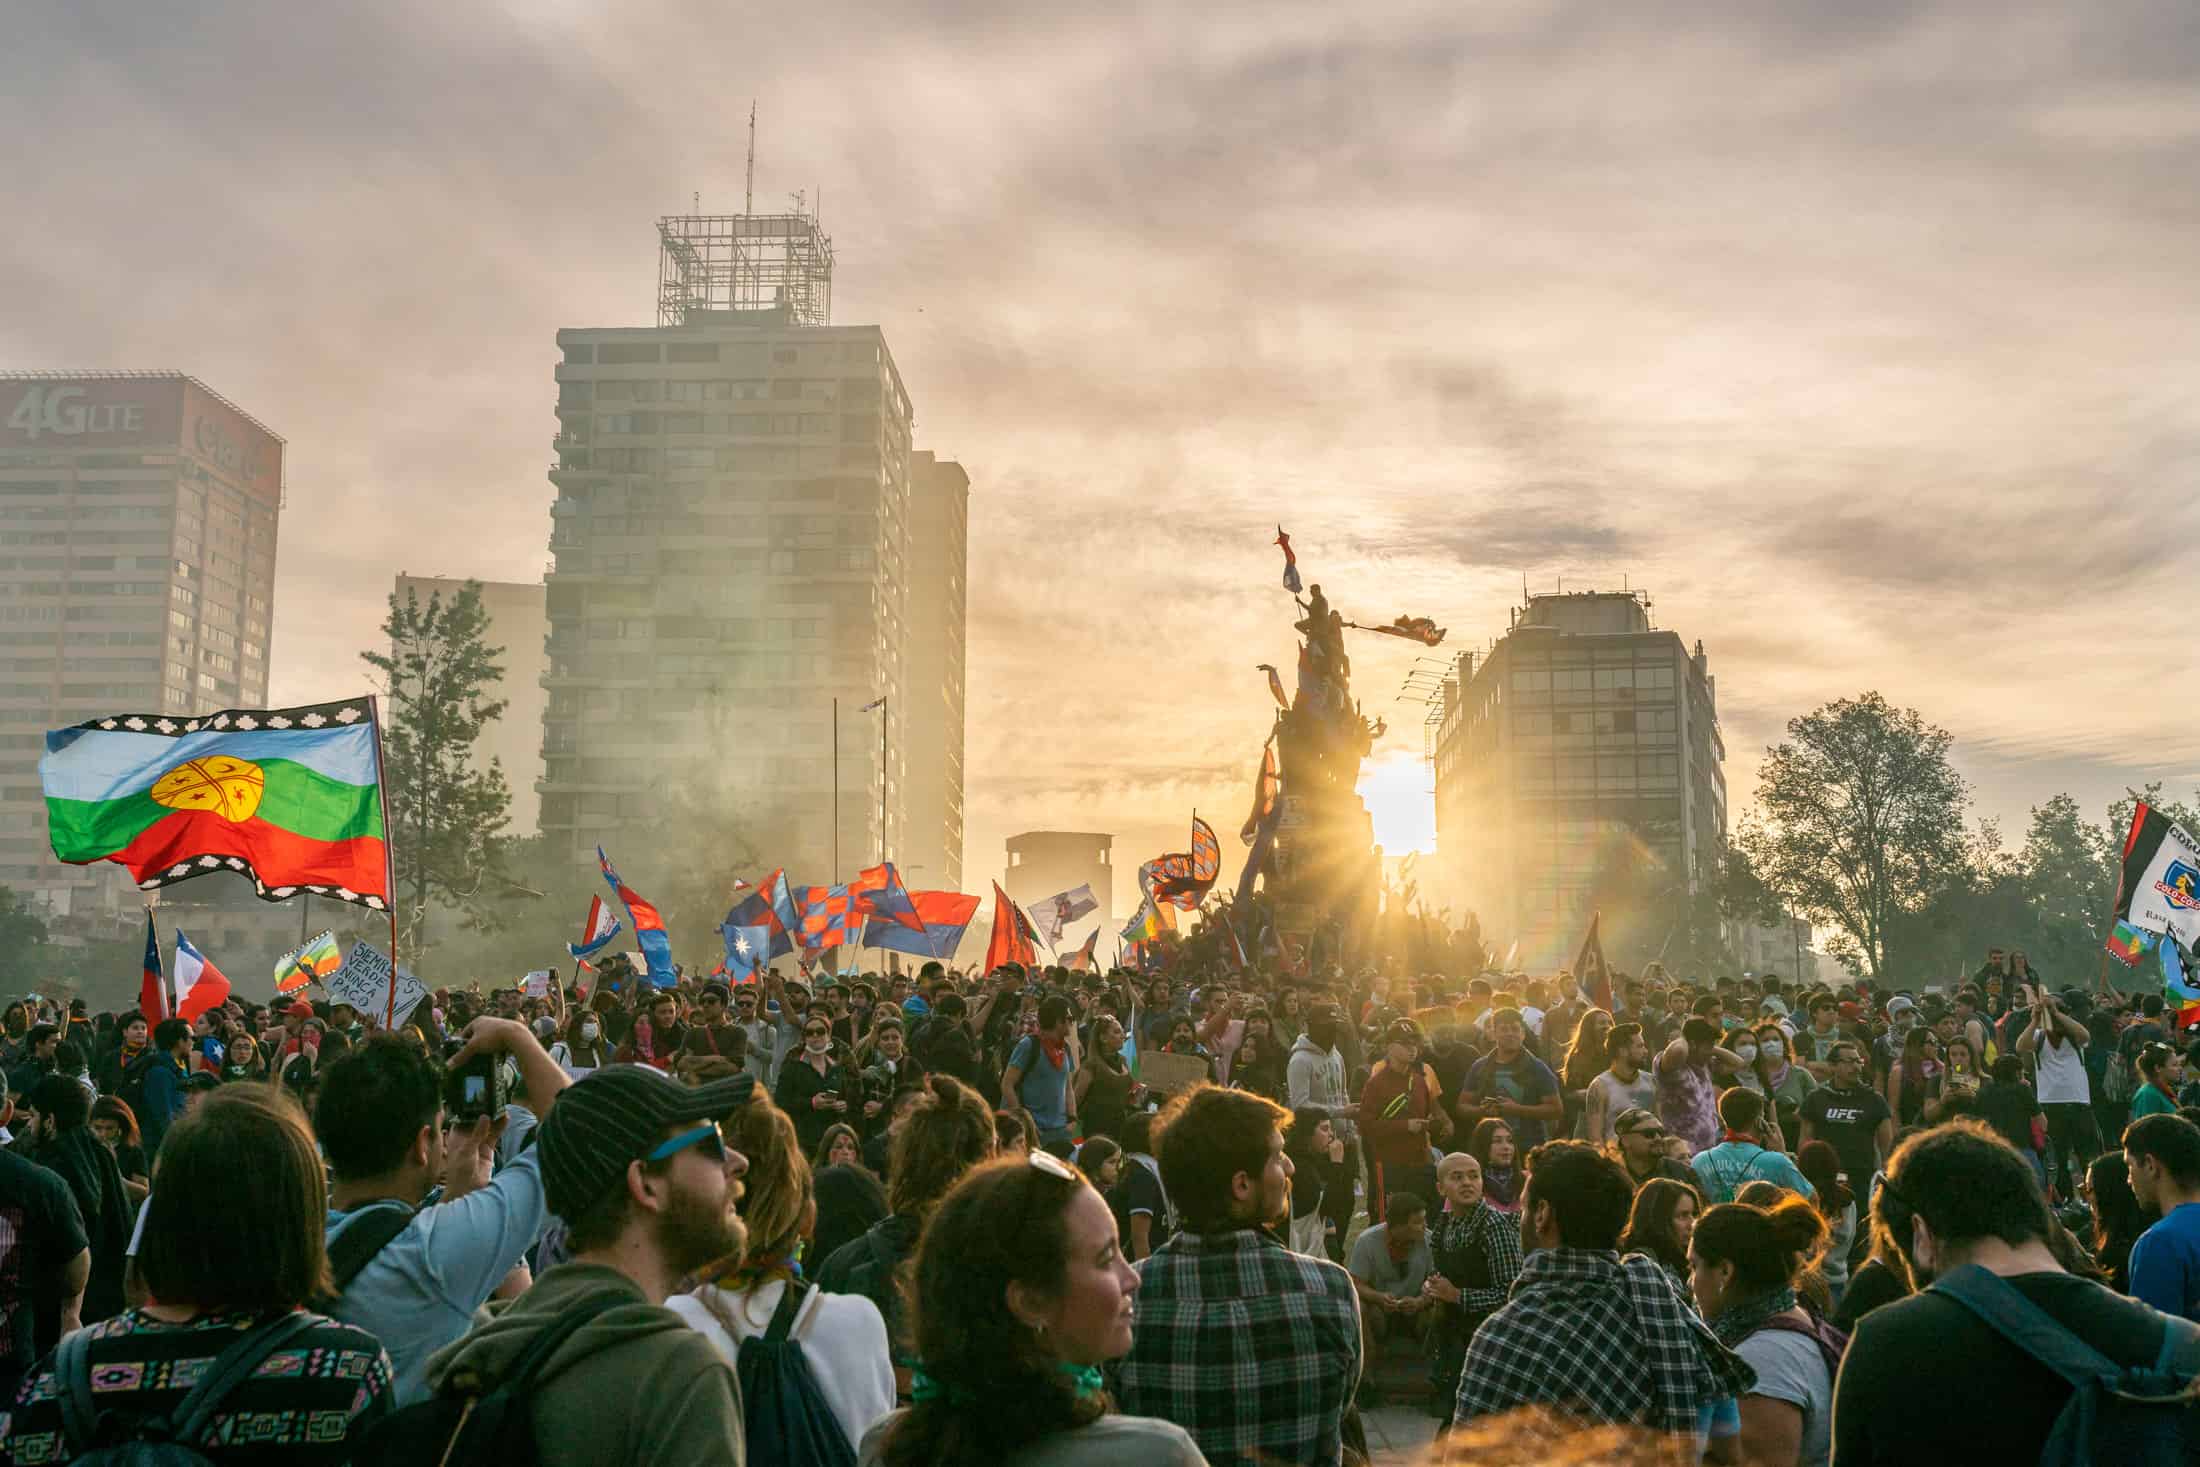 Chile at a Crossroads